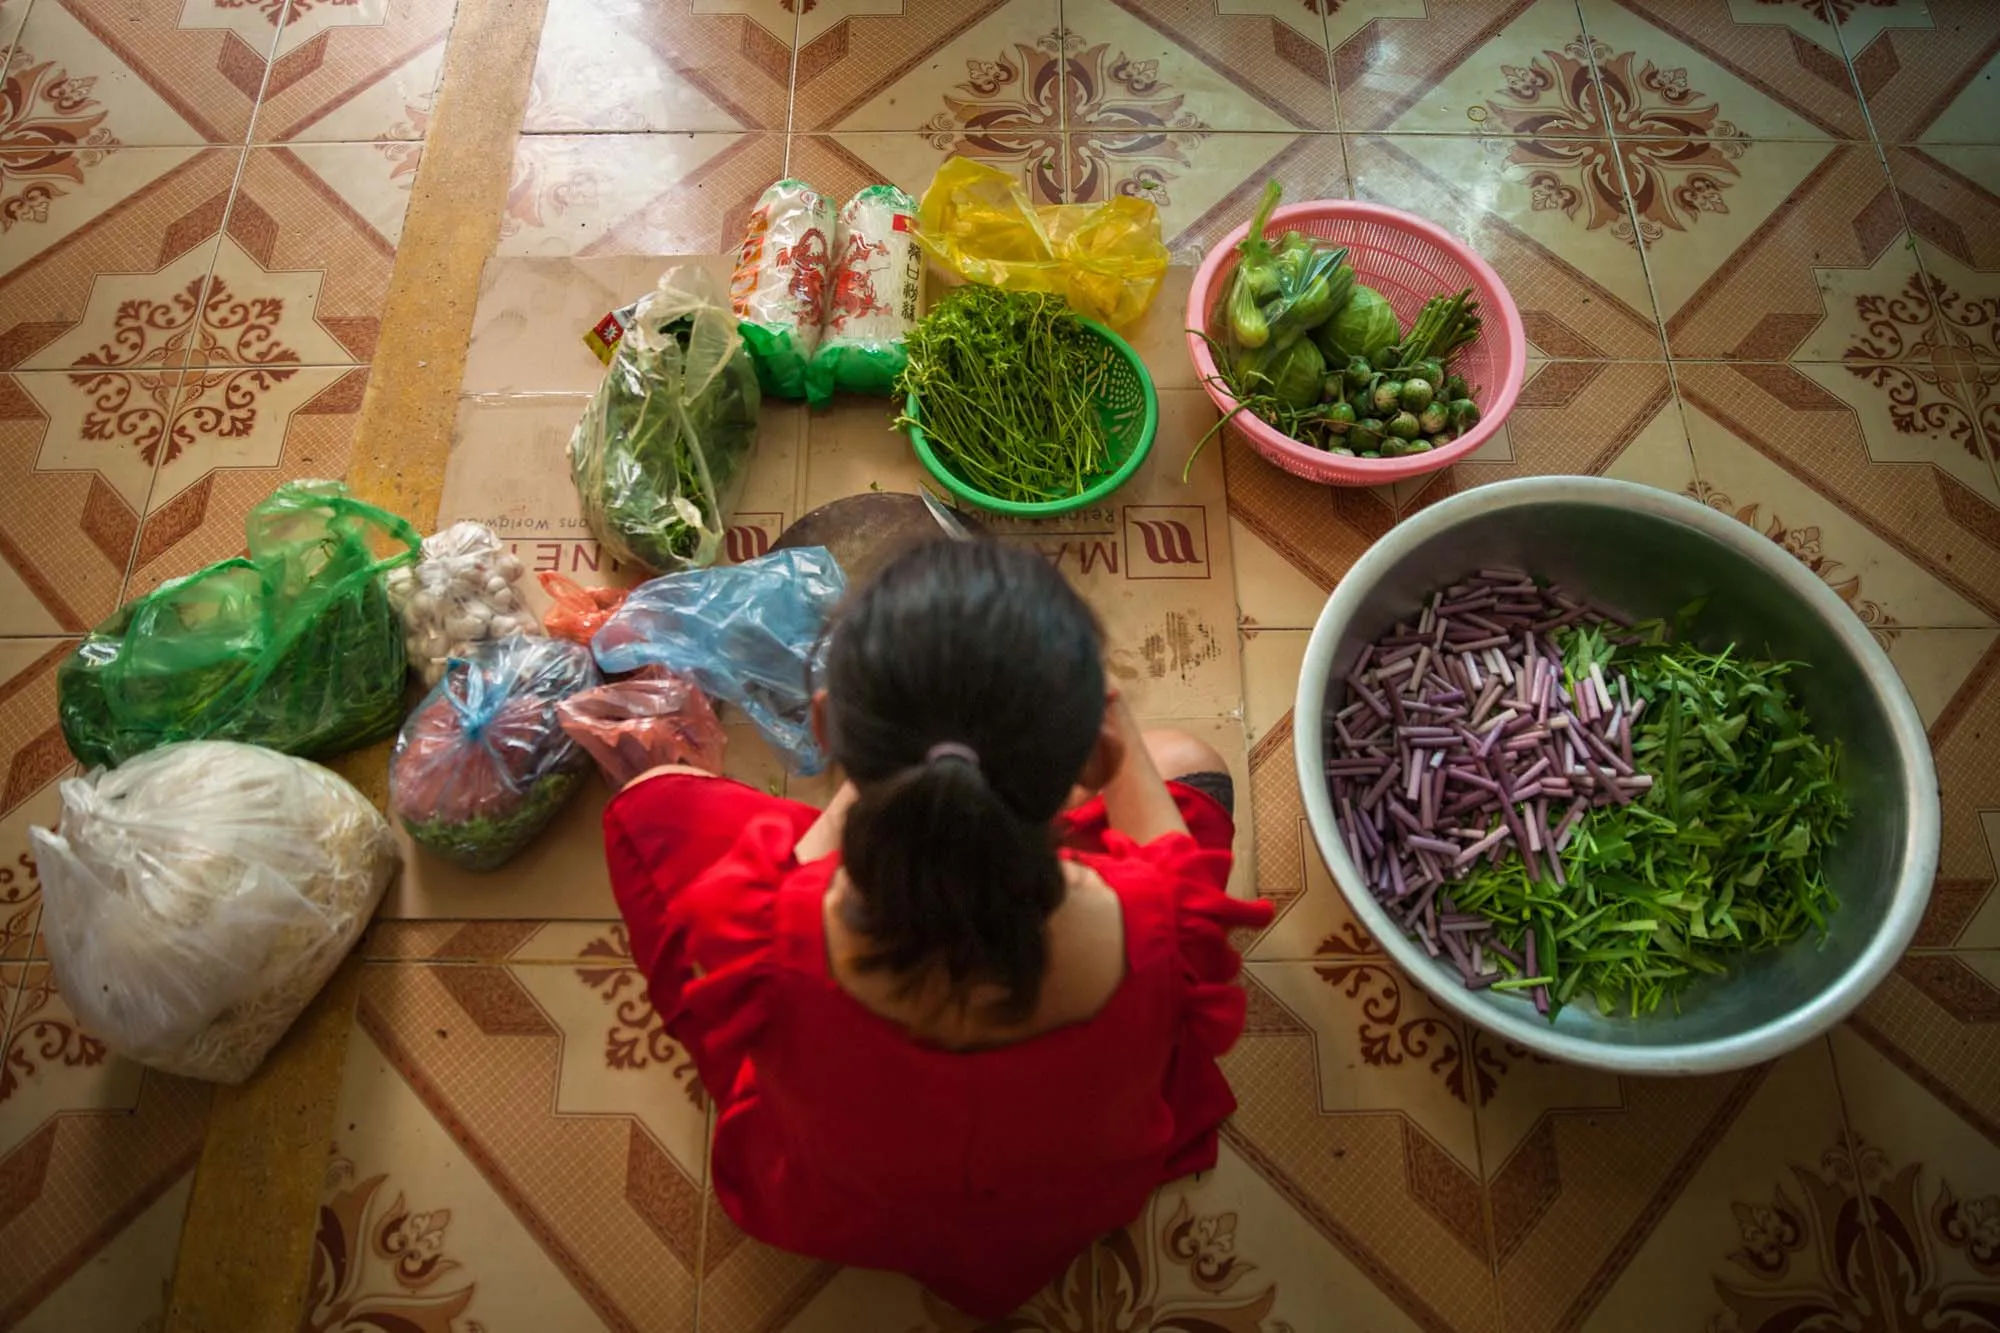 Image of a woman shot from above, sitting on the floor surrounded by bowls of greenery and vegetables